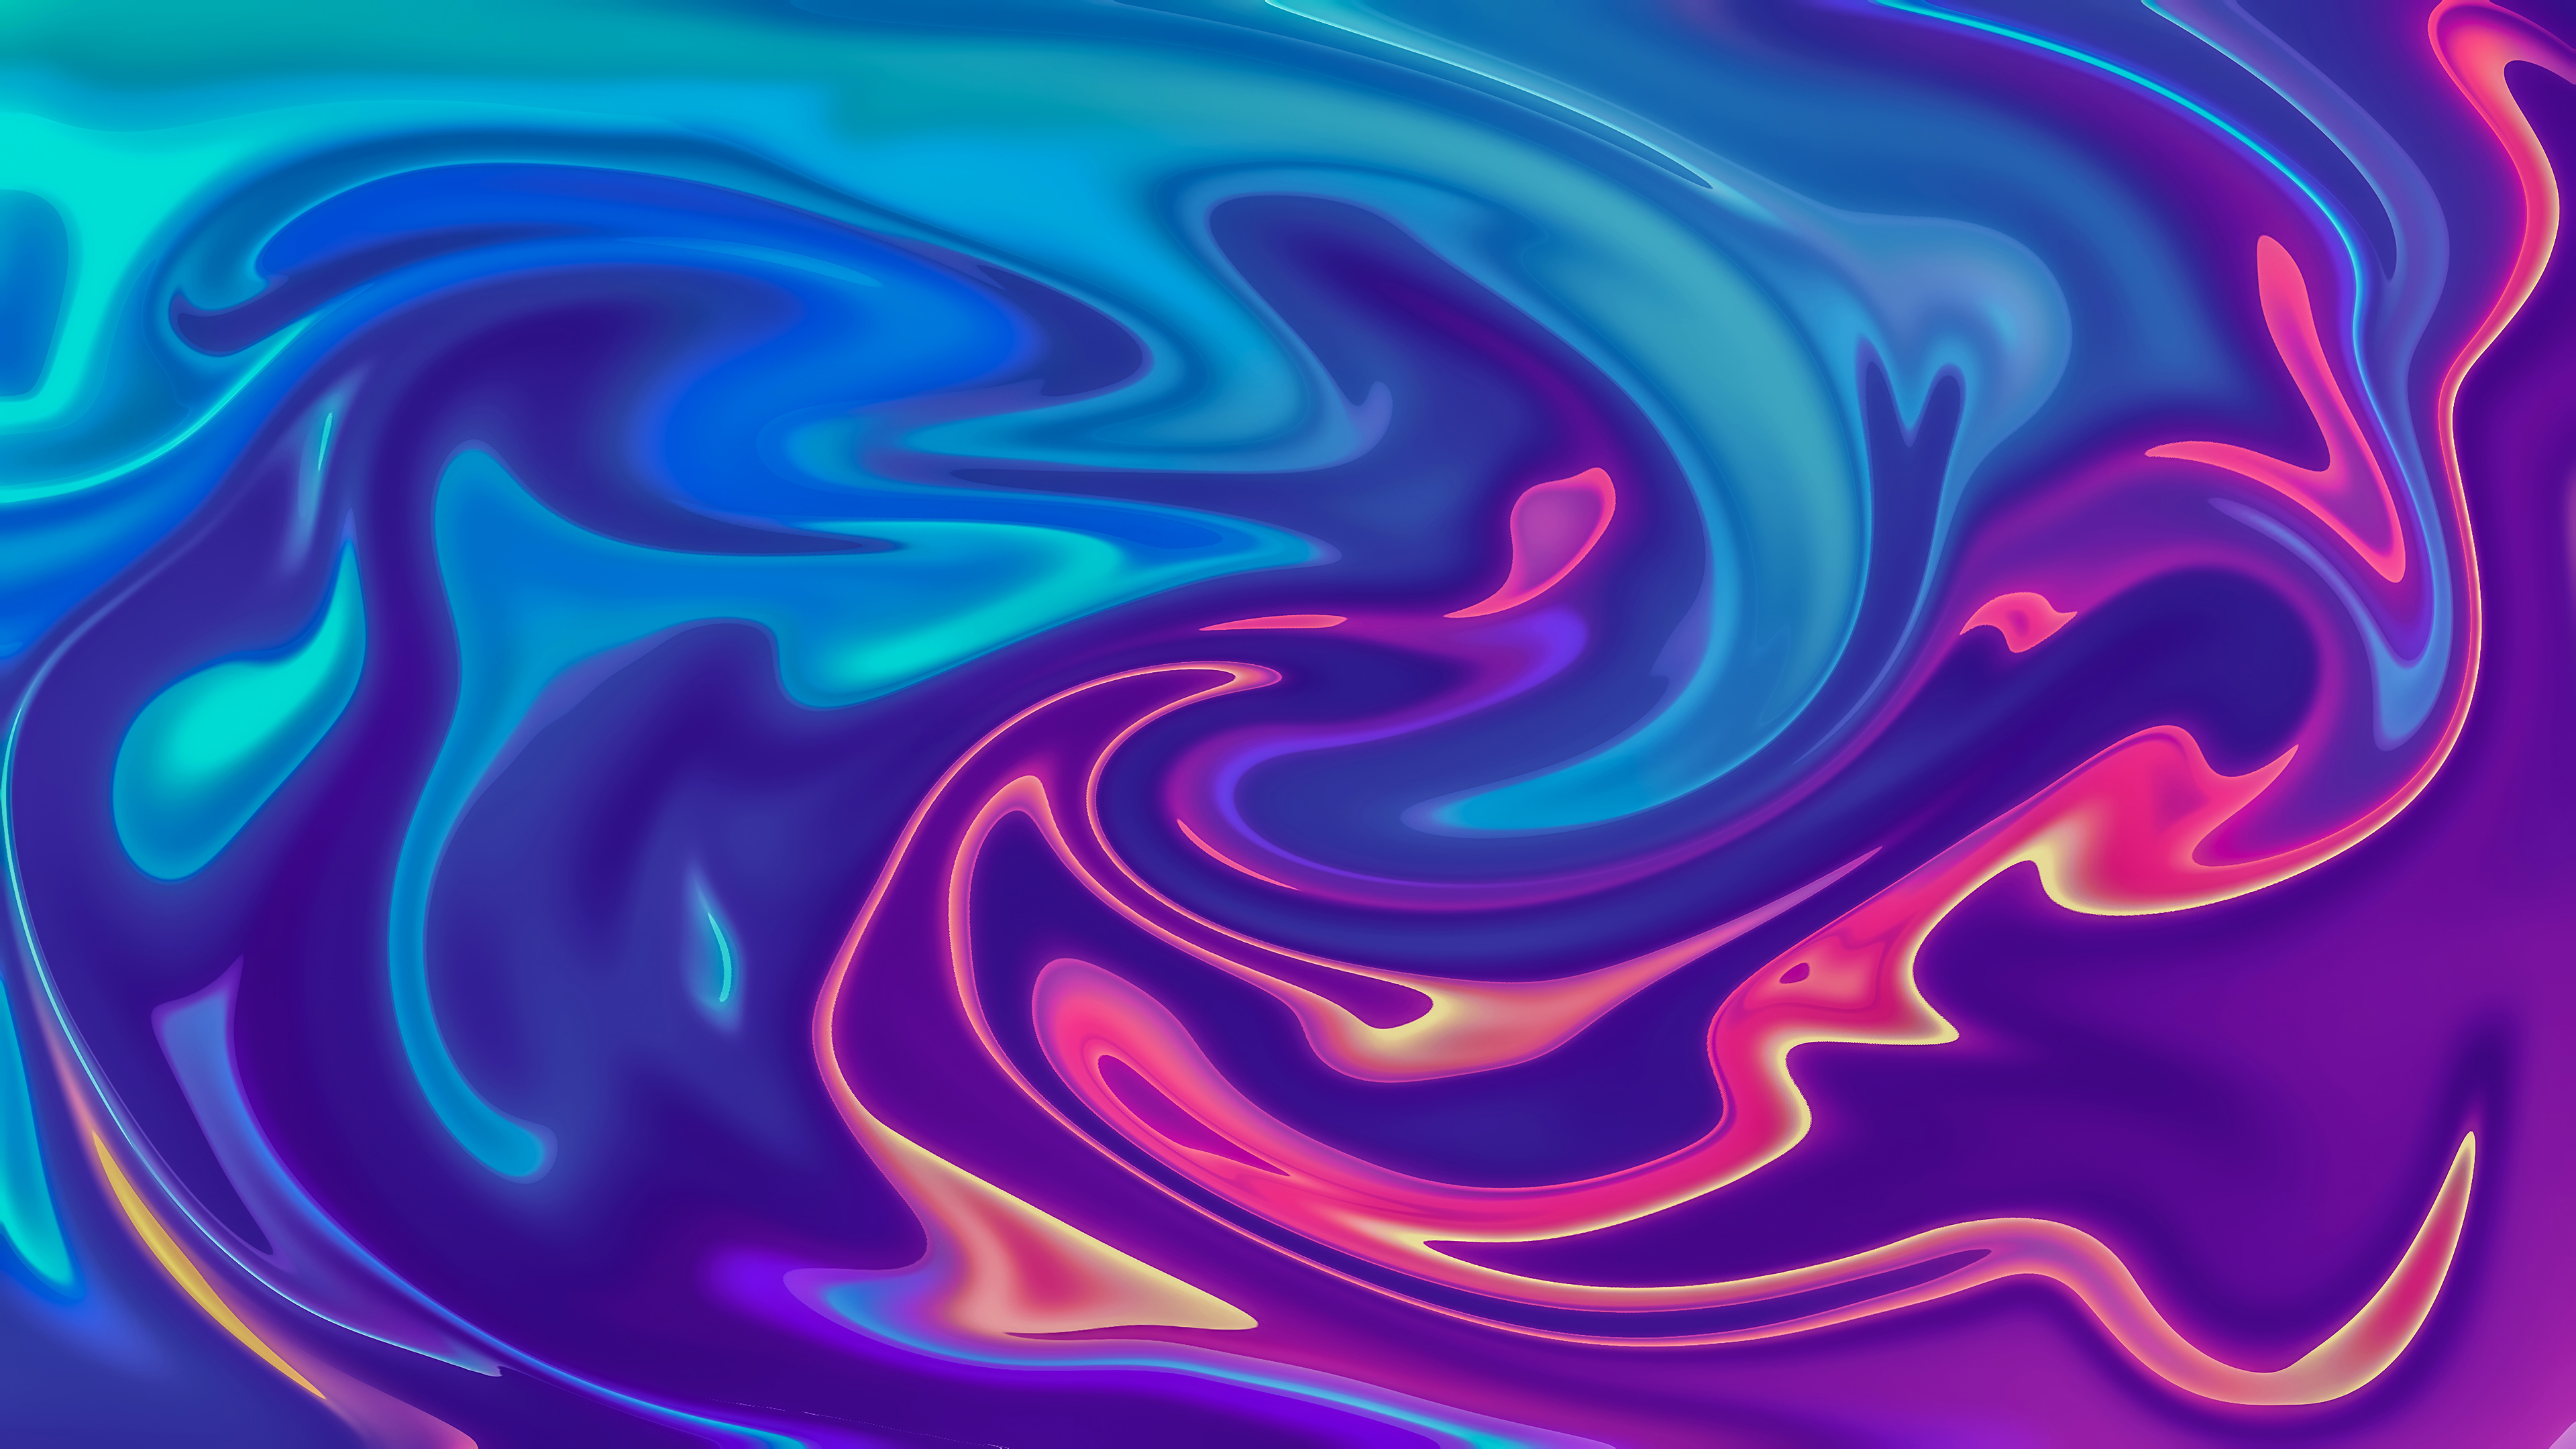 Cool Swirl Colorful Art Wallpapers